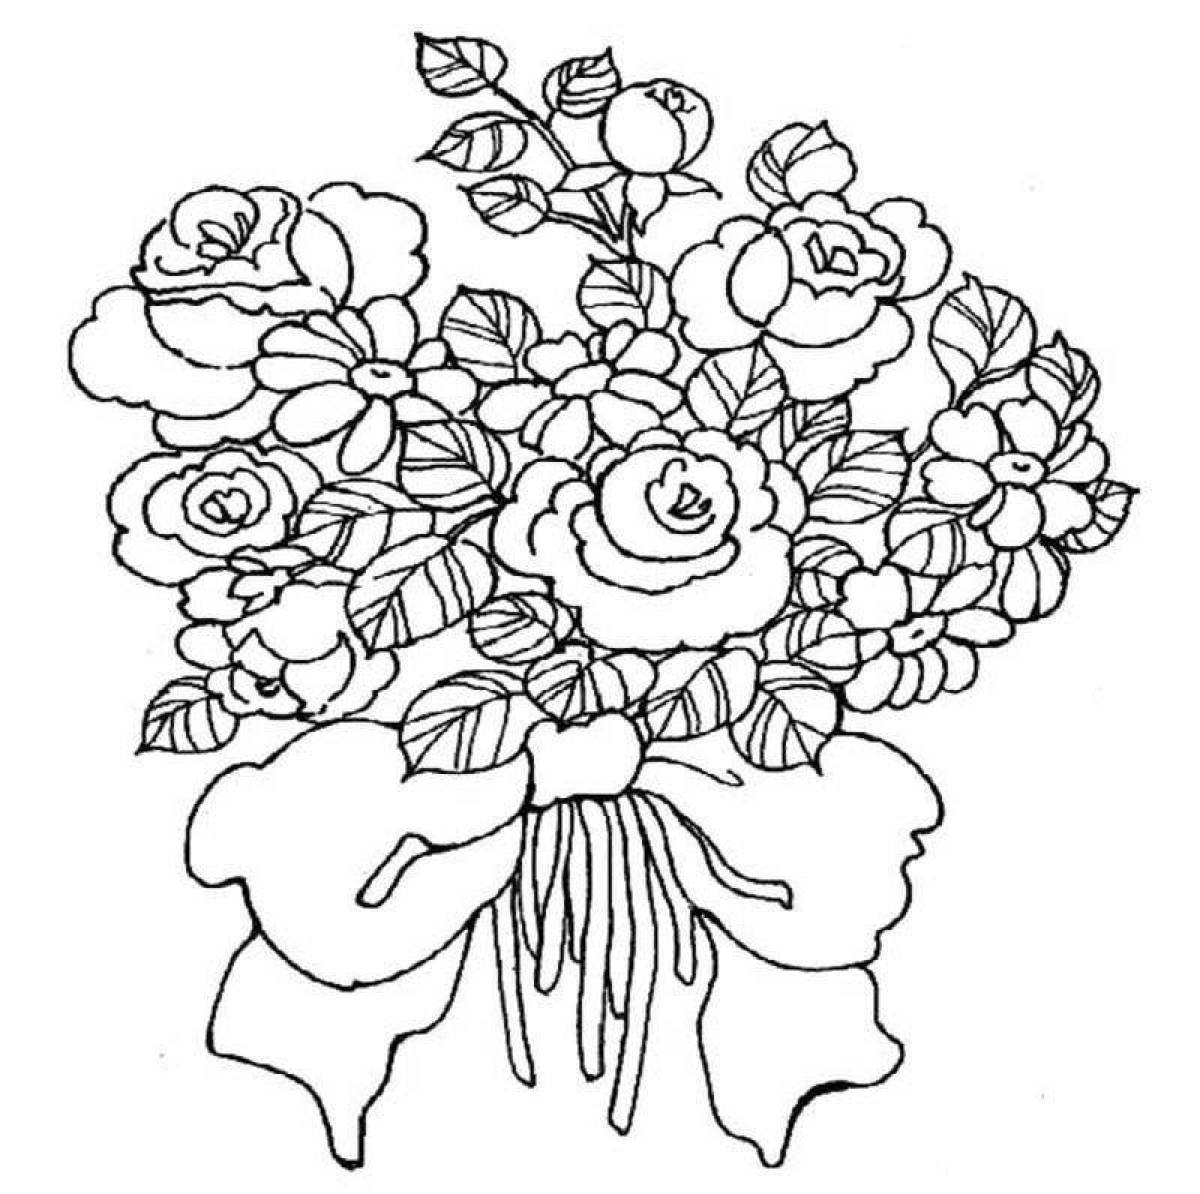 Coloring book cheerful bouquet of roses